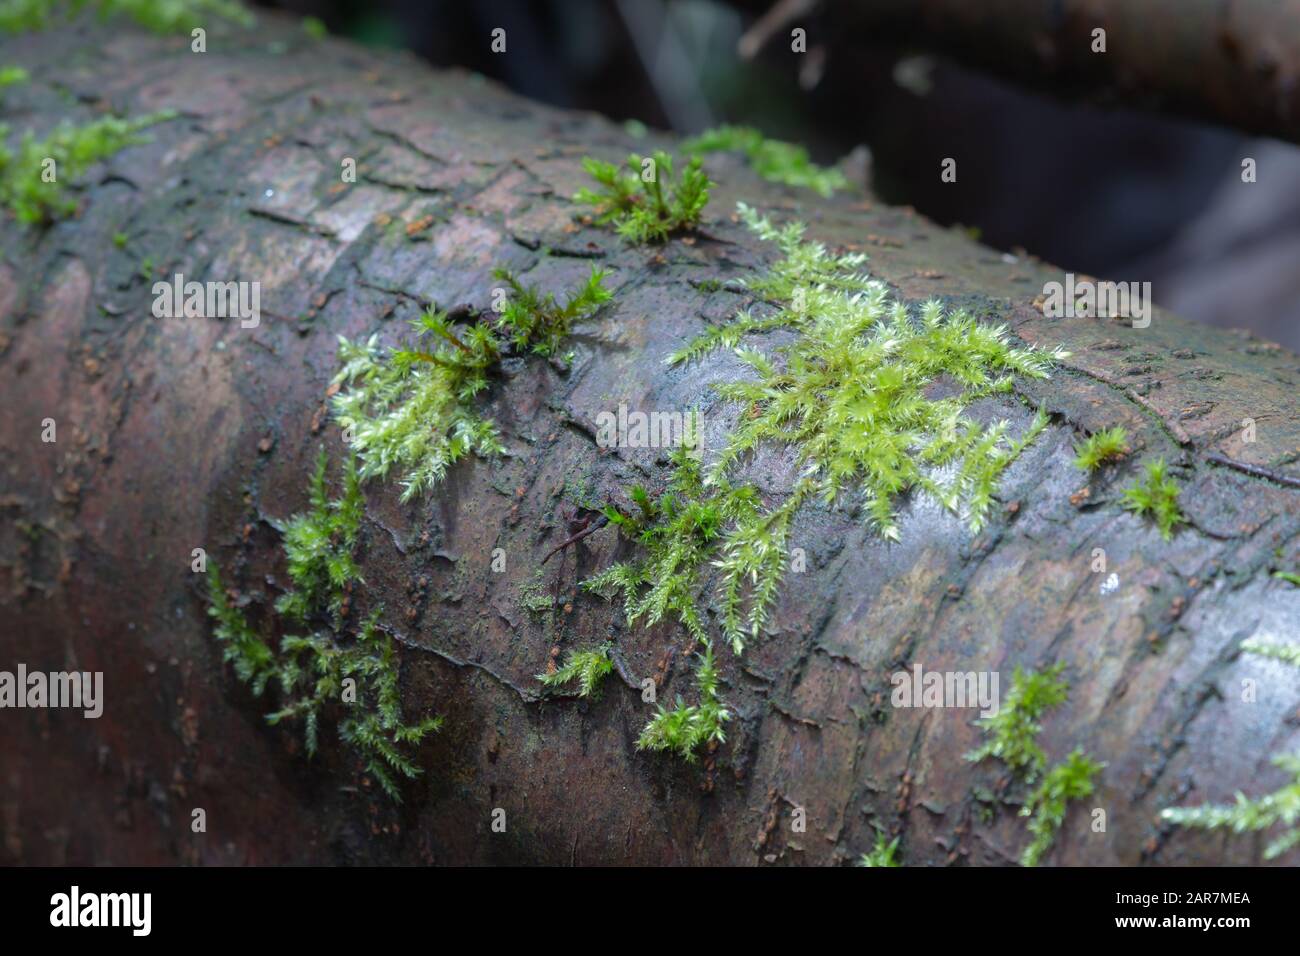 Dicranella heteromalla moss growing on the branch in the forest Stock Photo